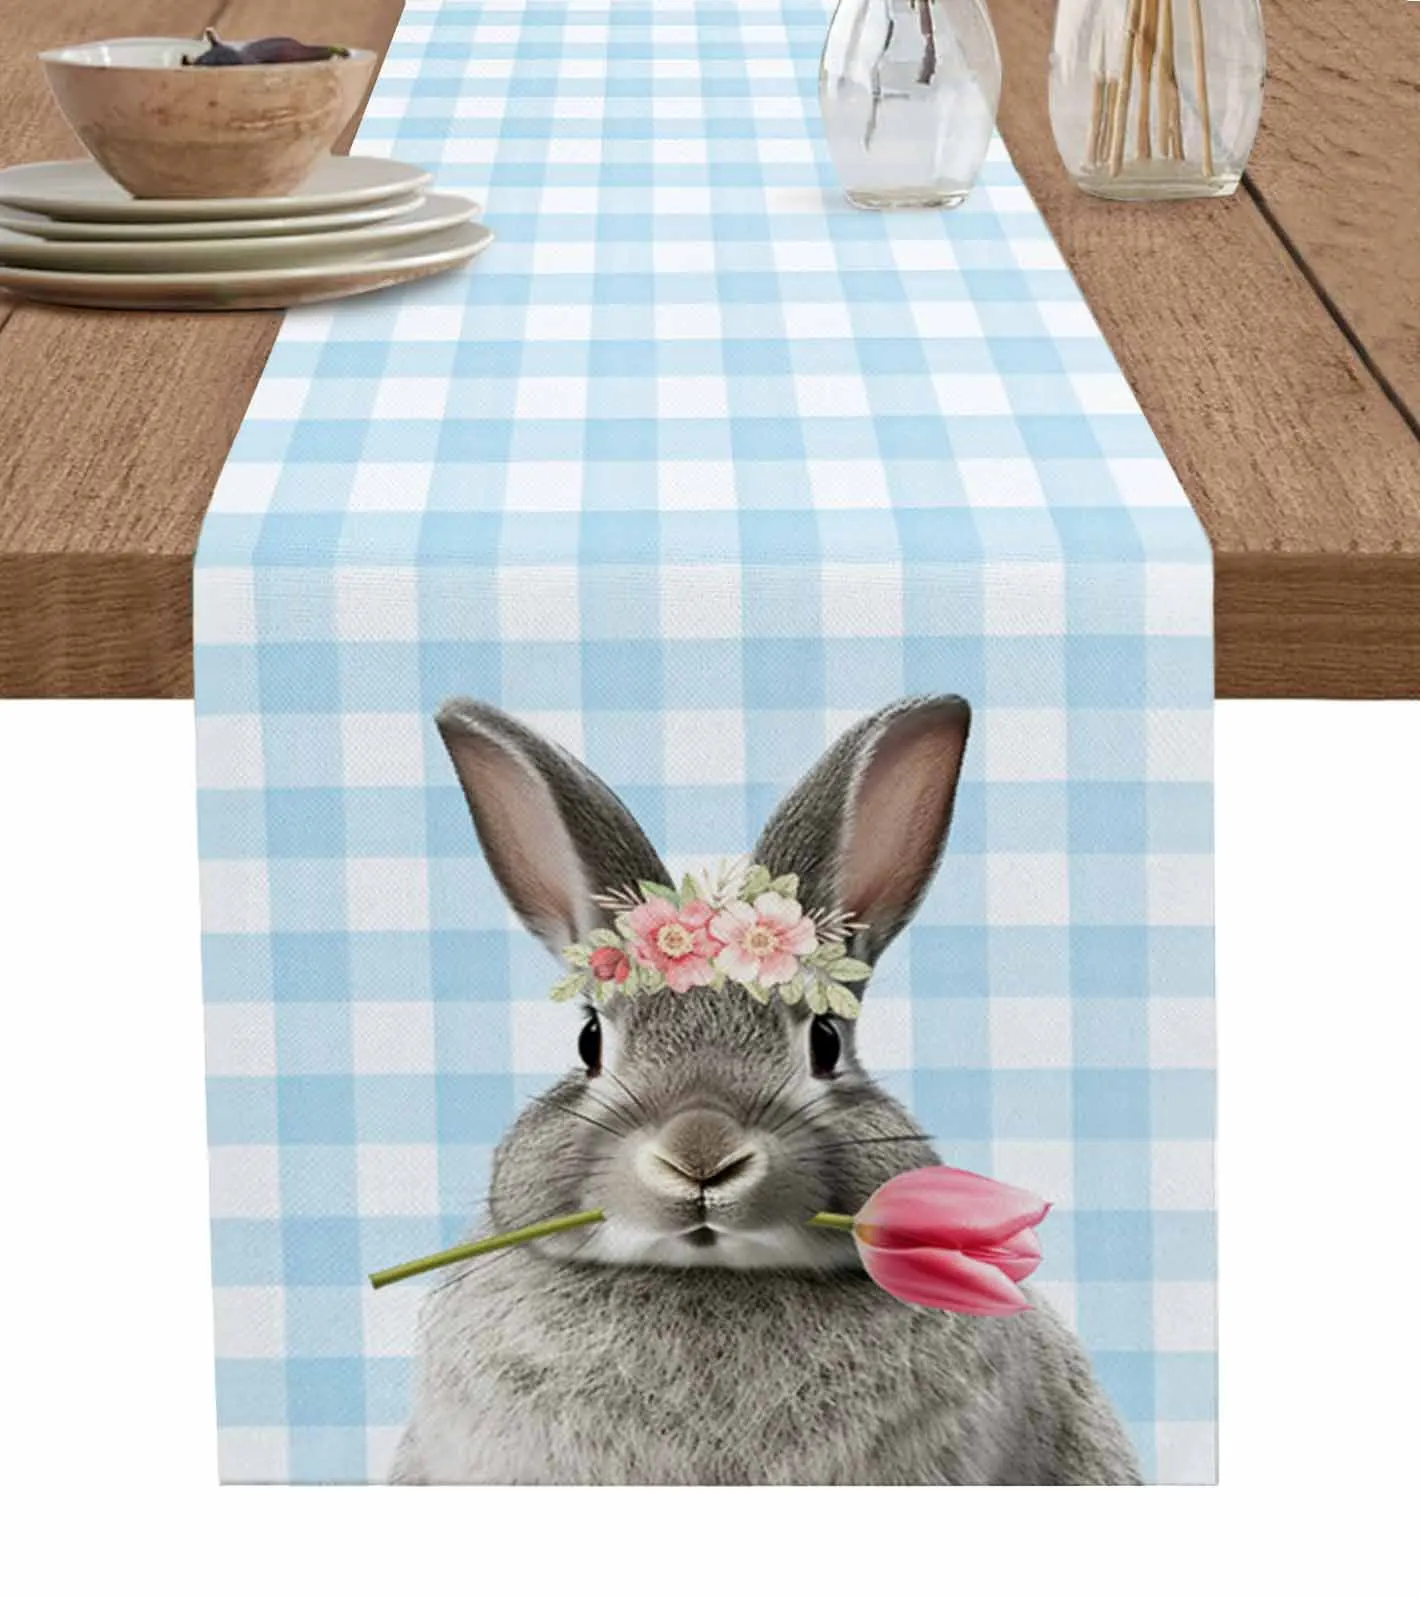 

Easter Bunny Plaid Tulips Table Runner Cotton Linen Wedding Decor Tablecloth Holiday Kitchen Decor Table Runner